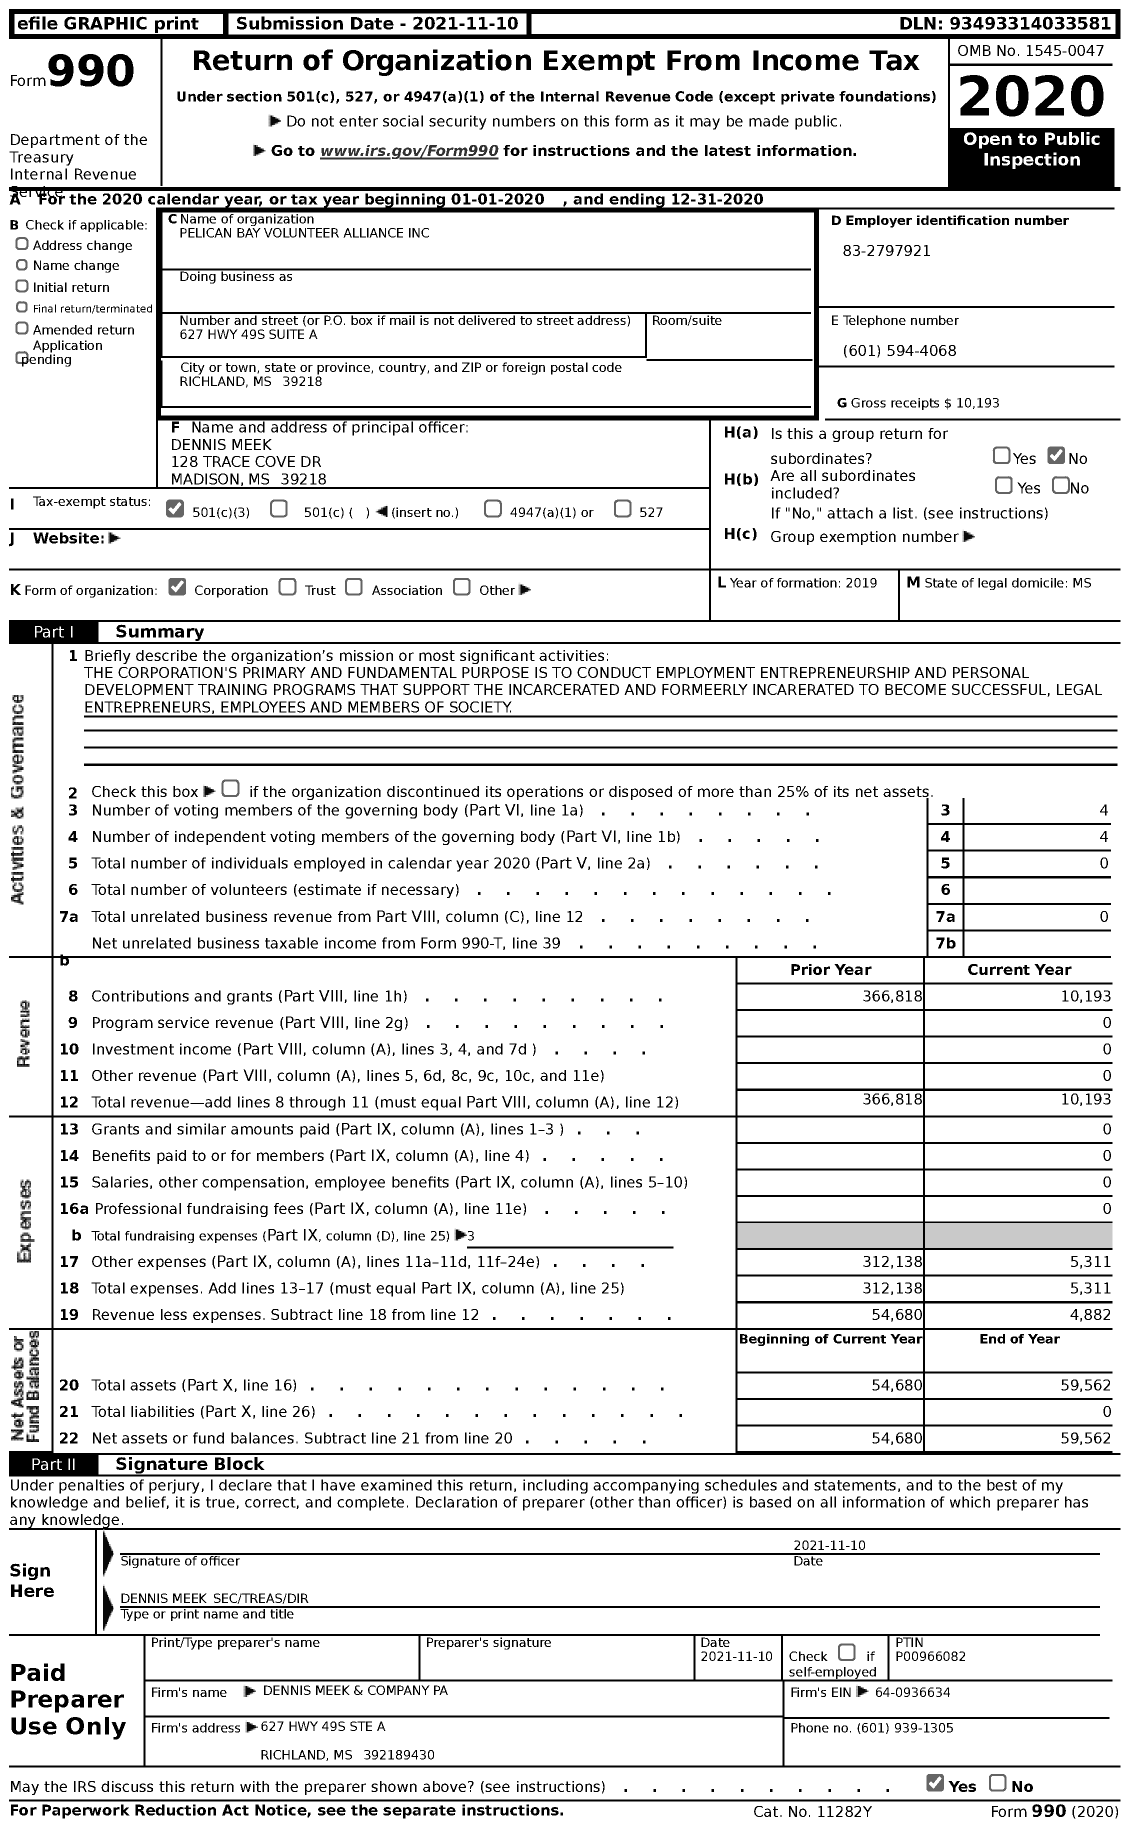 Image of first page of 2020 Form 990 for Pelican Bay Volunteer Alliance